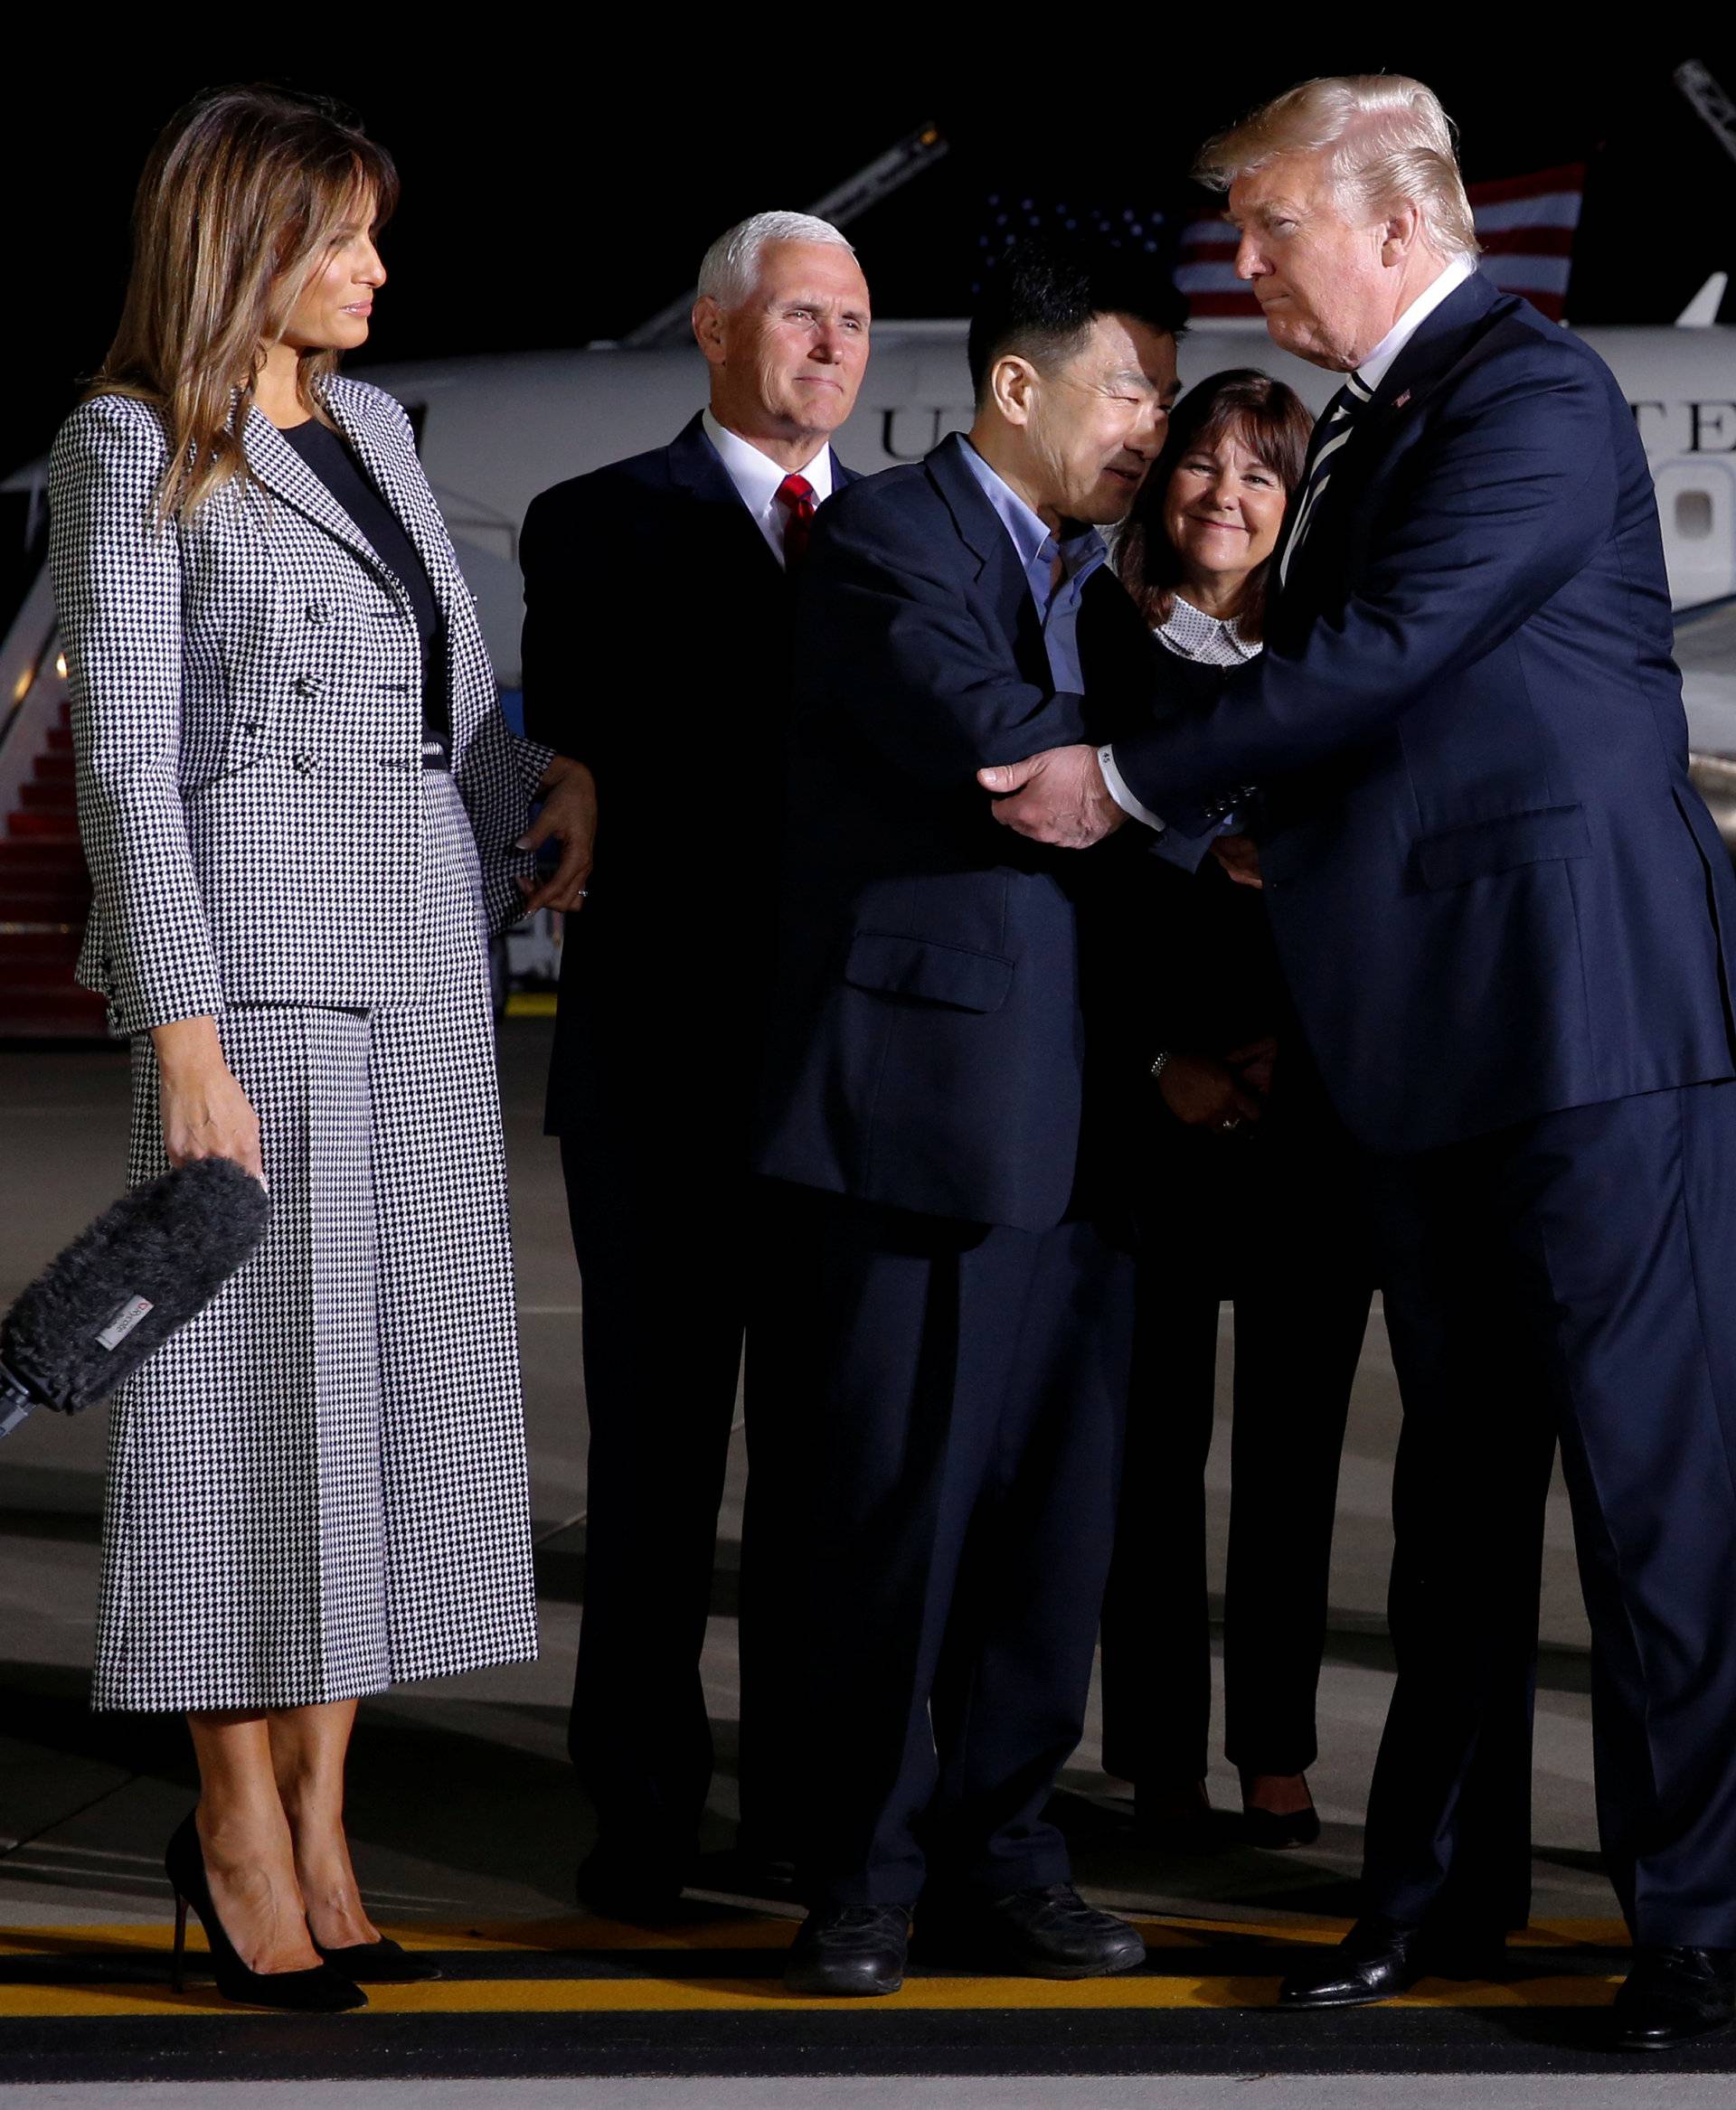 U.S.President Donald Trump greets the Americans released from detention in North Korea, Tony Kim, Kim Hak-song and Kim Dong-chul, upon their arrival at Joint Base Andrews